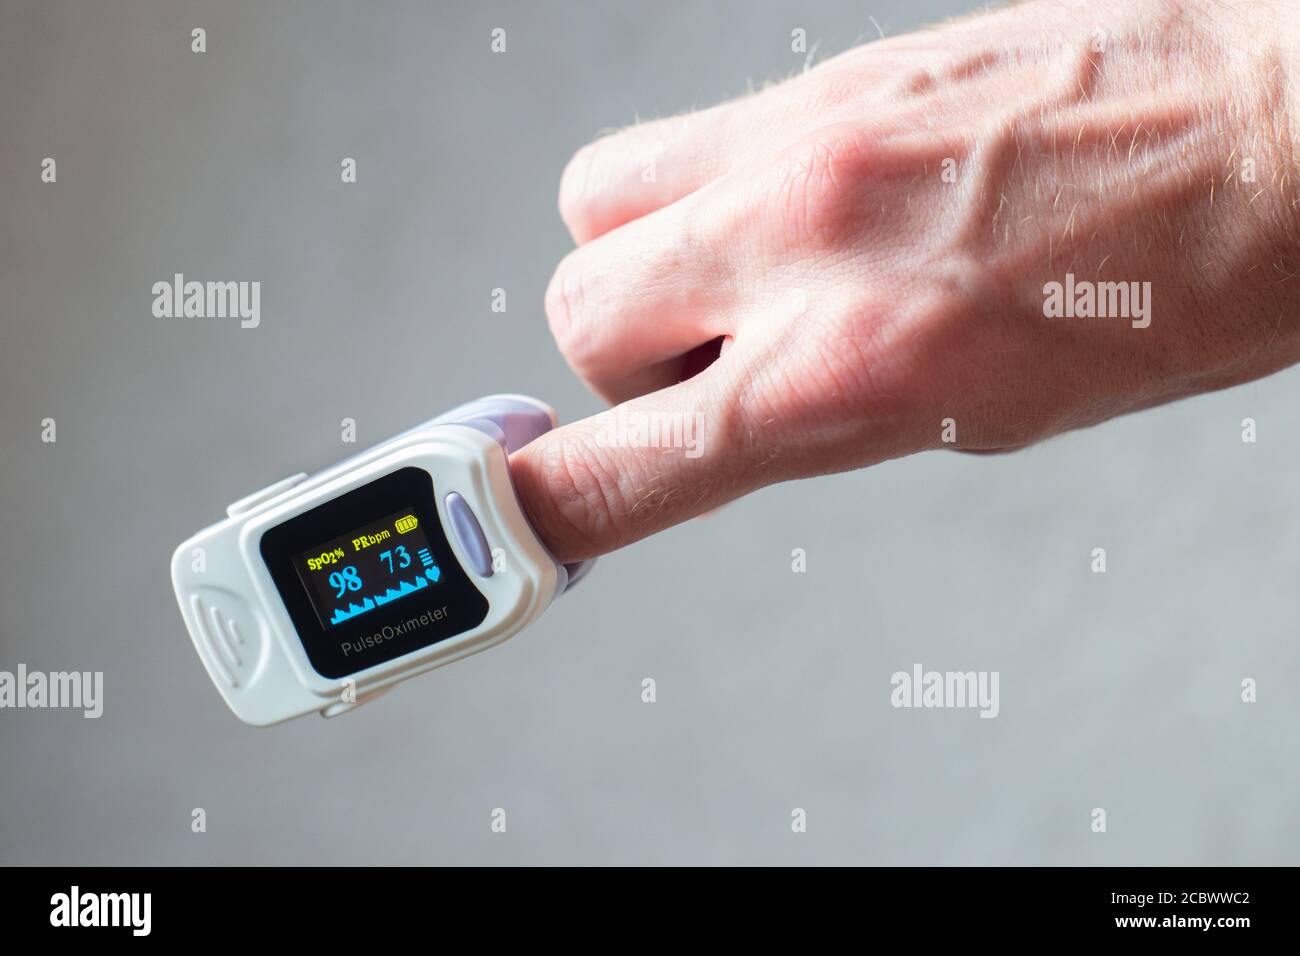 Blood oxygen saturation meter, or pulse oximeter, for measuring oxygen saturation in blood or 'sats'. Also provides pulse rate. Non invasive device Stock Photo